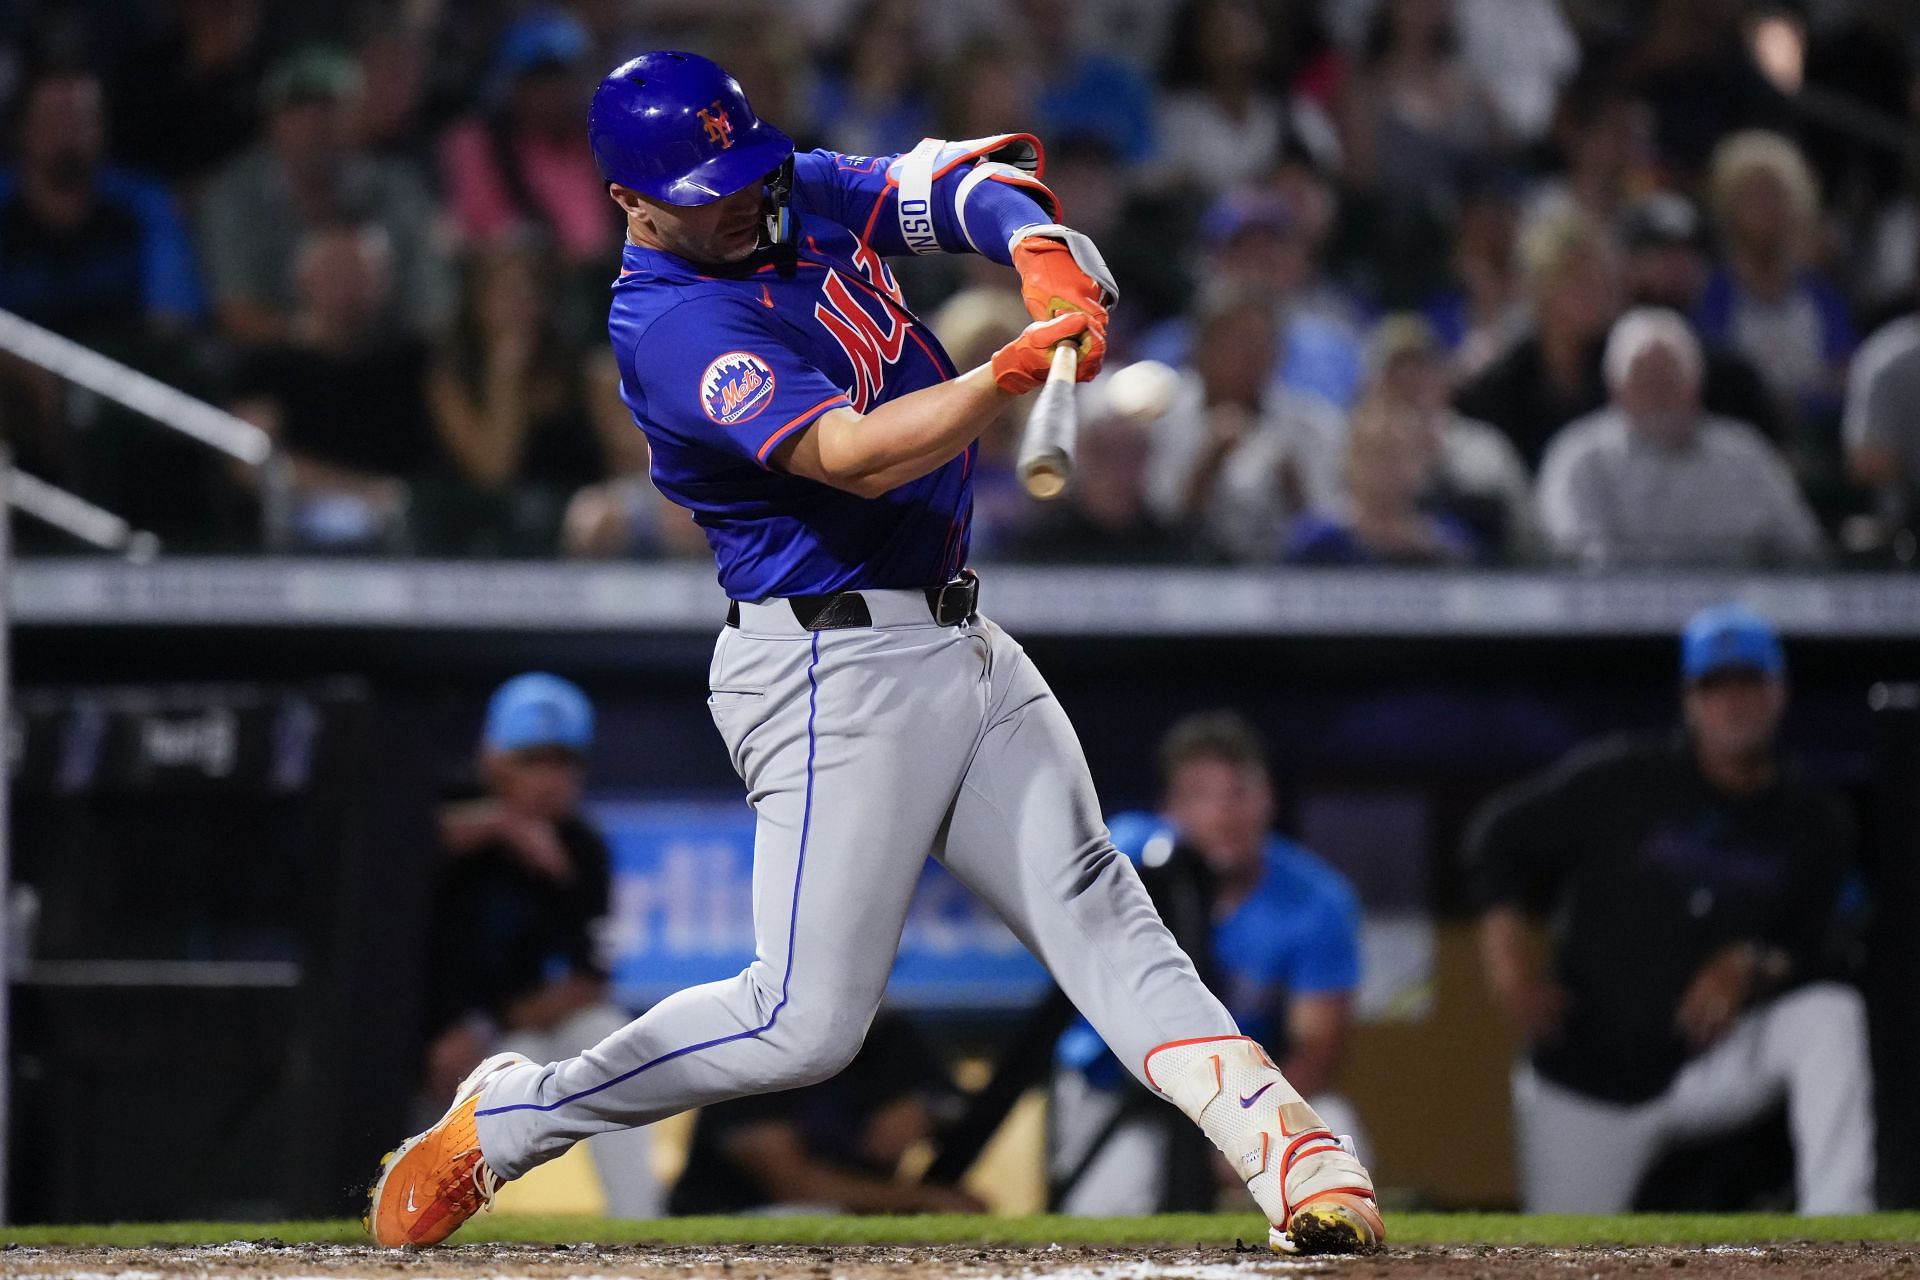 According to reports, the Seattle Mariners could be interested in acquiring the services of Pete Alonso.